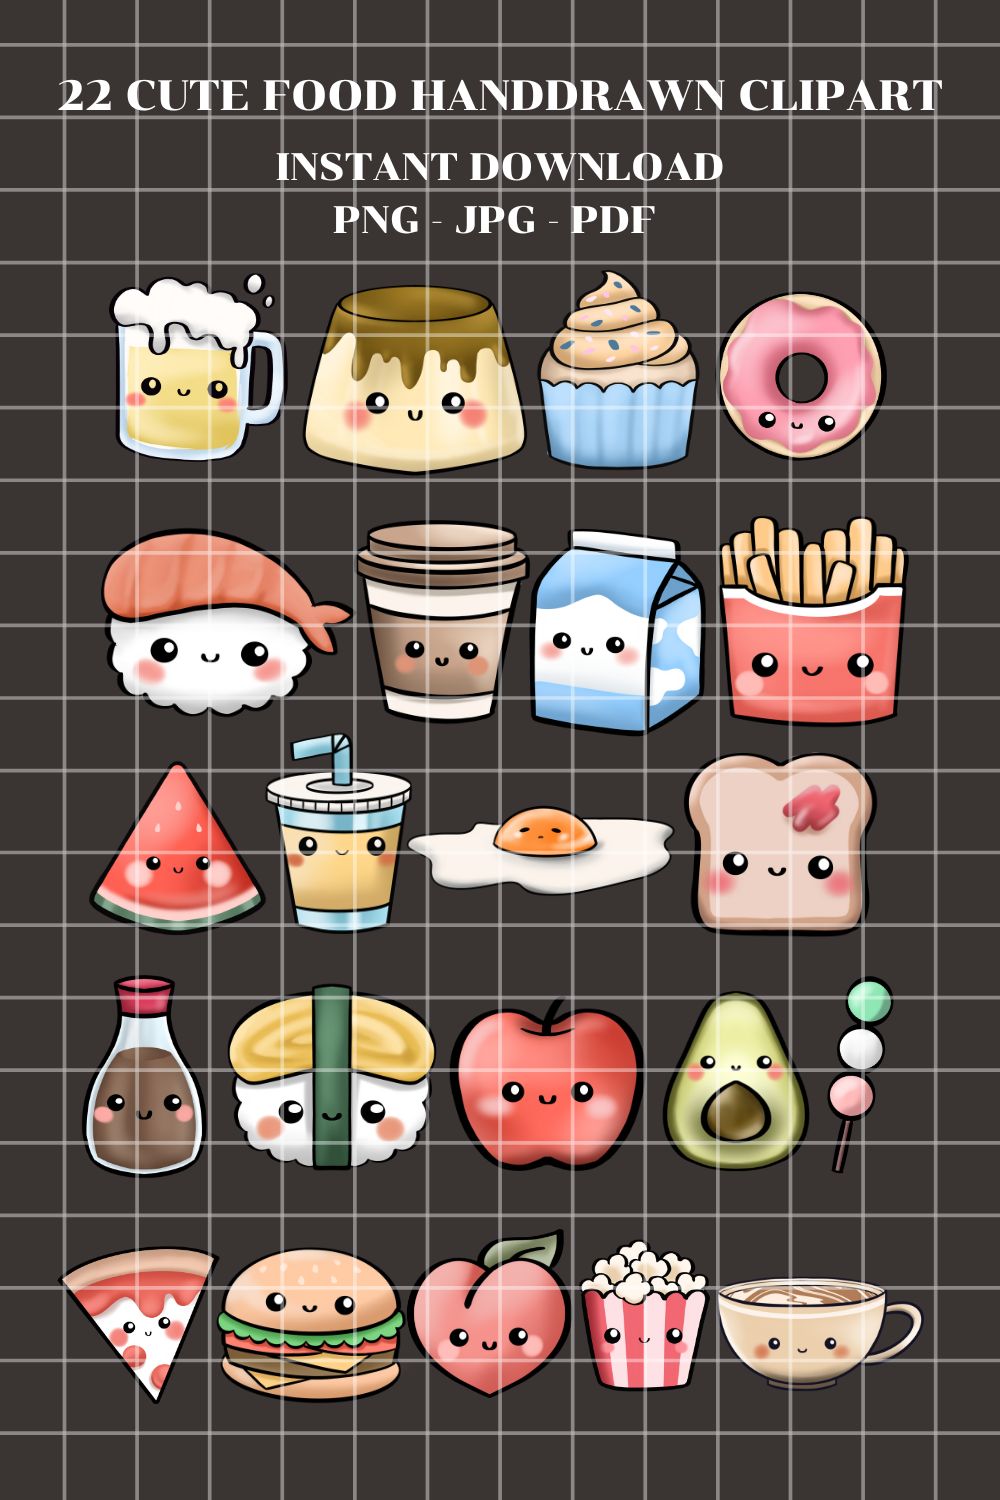 22 Cute Food Handdrawn Clipart - PNG - JPG - PDF - Instant download pinterest preview image.